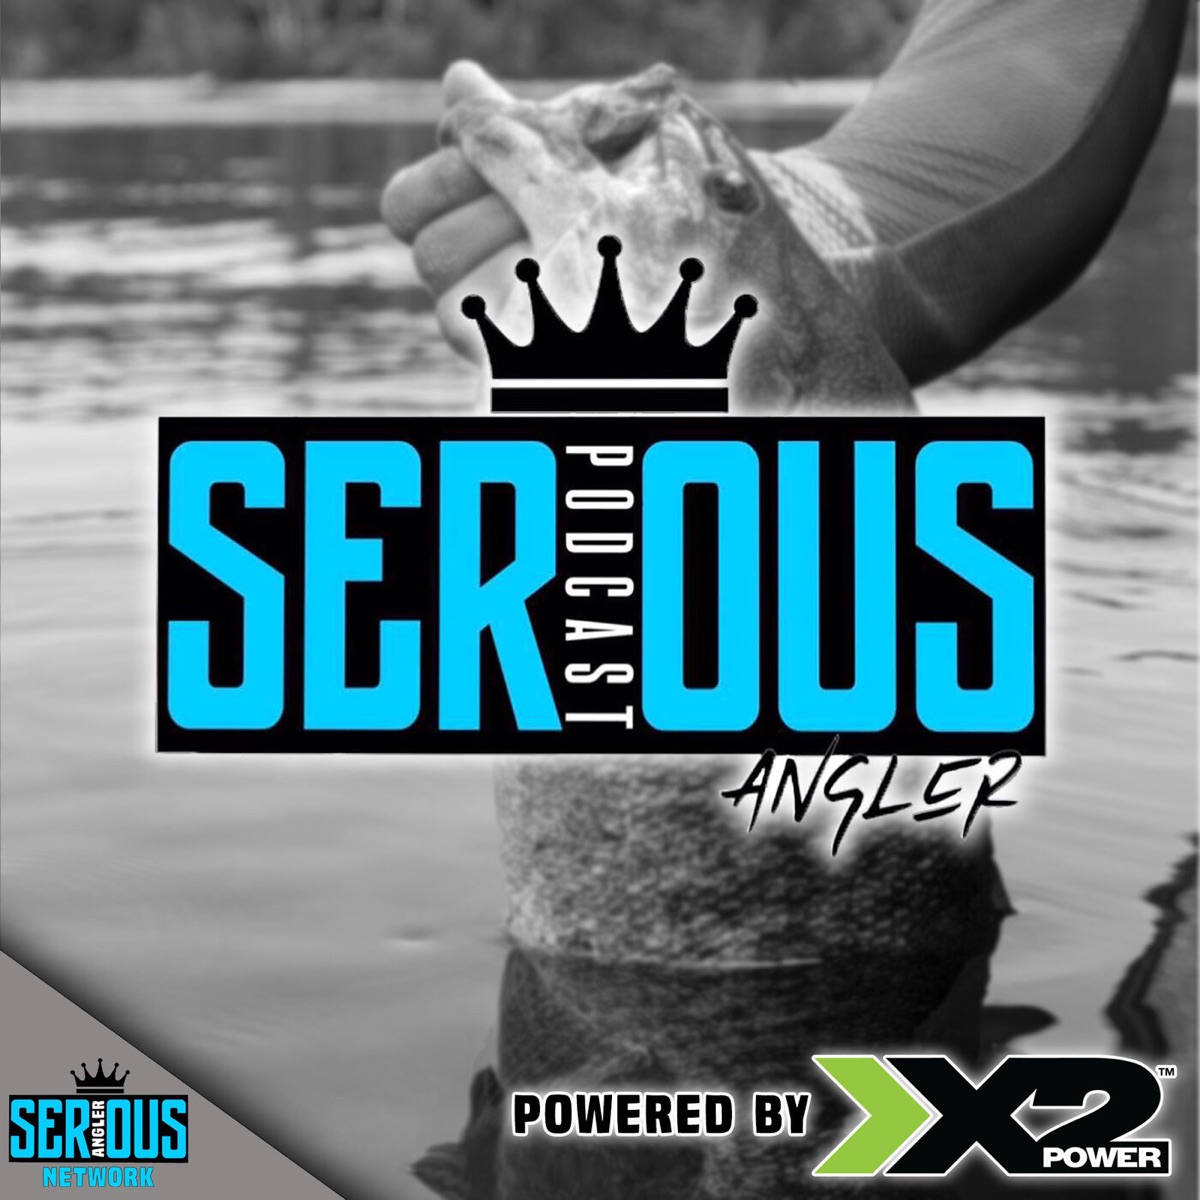 Serious Angler Bass Fishing Podcast – Podcast – Podtail